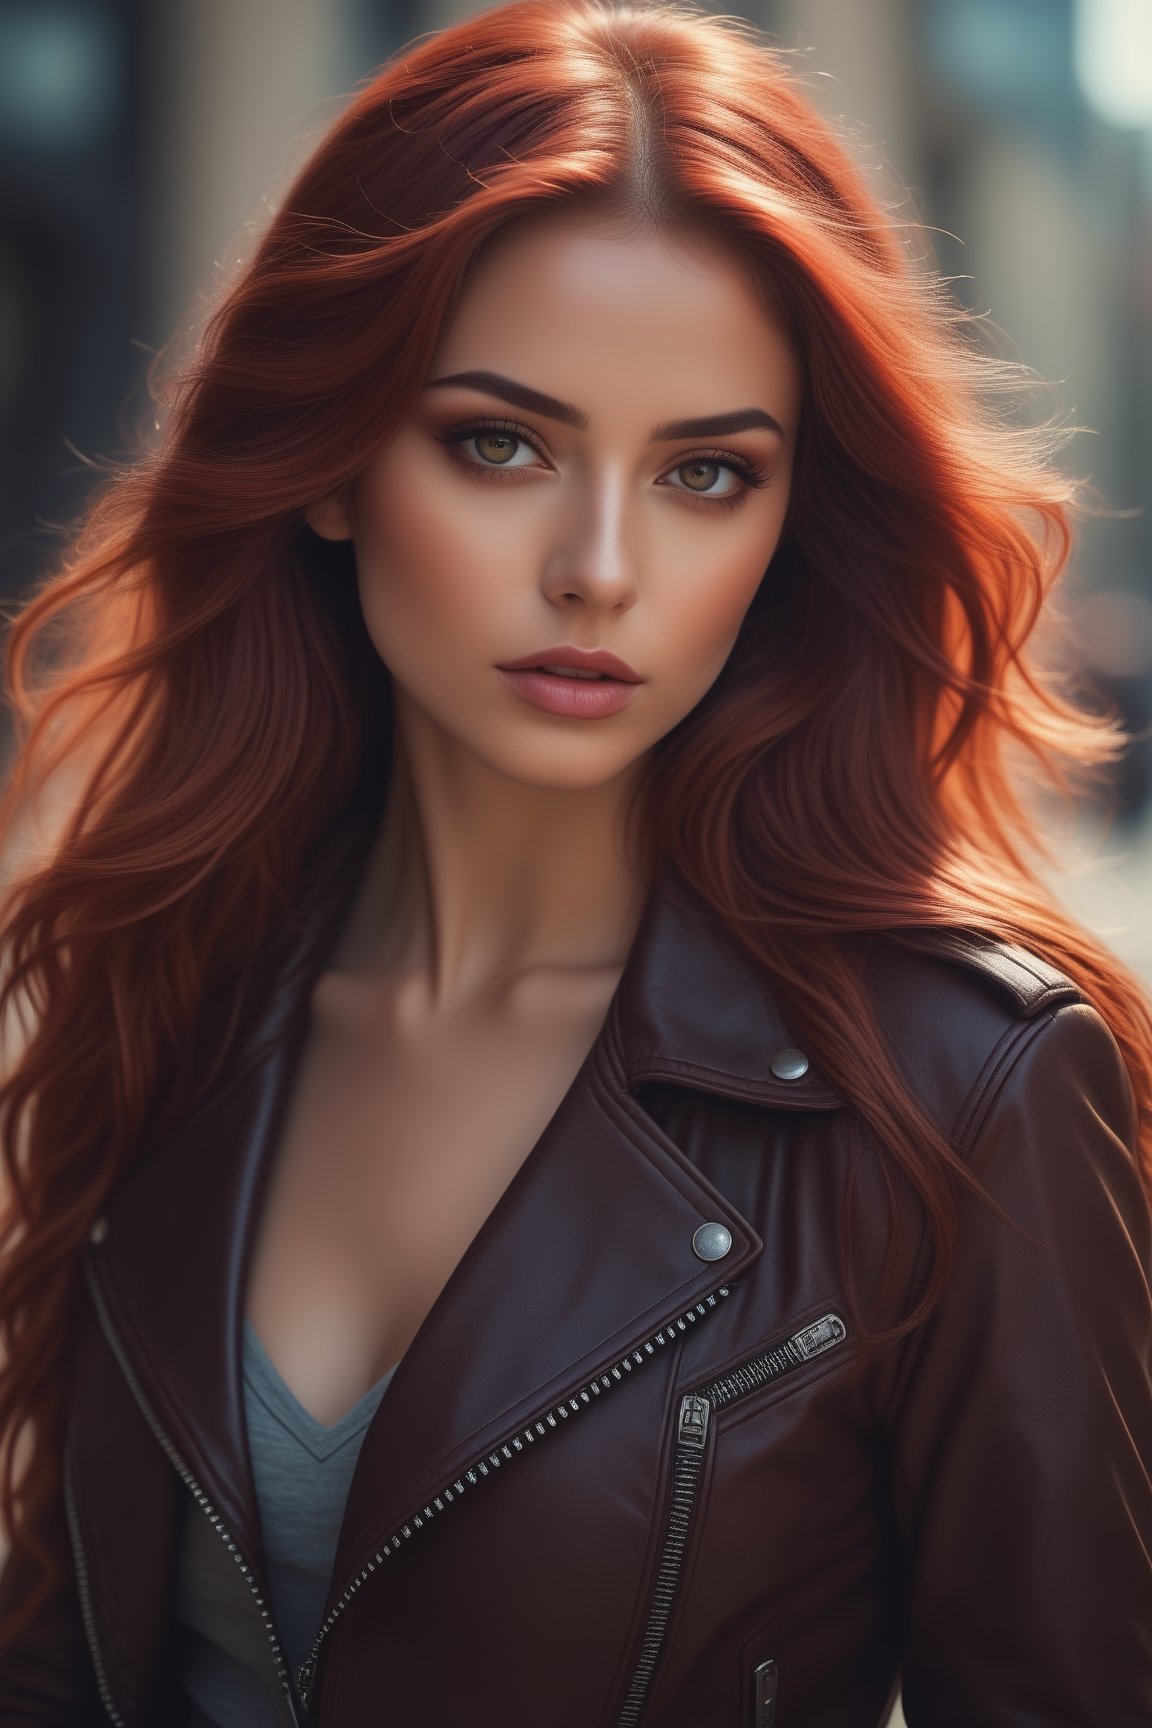 raw realistic/ima/imagine elf mspy girl with red long hair and leather jacket, in the style of jessica drossin, sun-kissed palettes, (((long wavy hair)))((((busty))))(((((brown skin))))))michael malm, luminous skies, city portraits, david nordahl, hyperrealistic animal portraits - hyperbole, leather/hide, exaggerated facil features  
grainy cinematic,  godlyphoto r3al,detailmaster2,aesthetic portrait, cinematic colors, earthy , moody,  look , grainy cinematic, fantasy vibes  godlyphoto r3al,detailmaster2,aesthetic portrait, cinematic colors, earthy , moody,  ,<lora:659095807385103906:1.0>